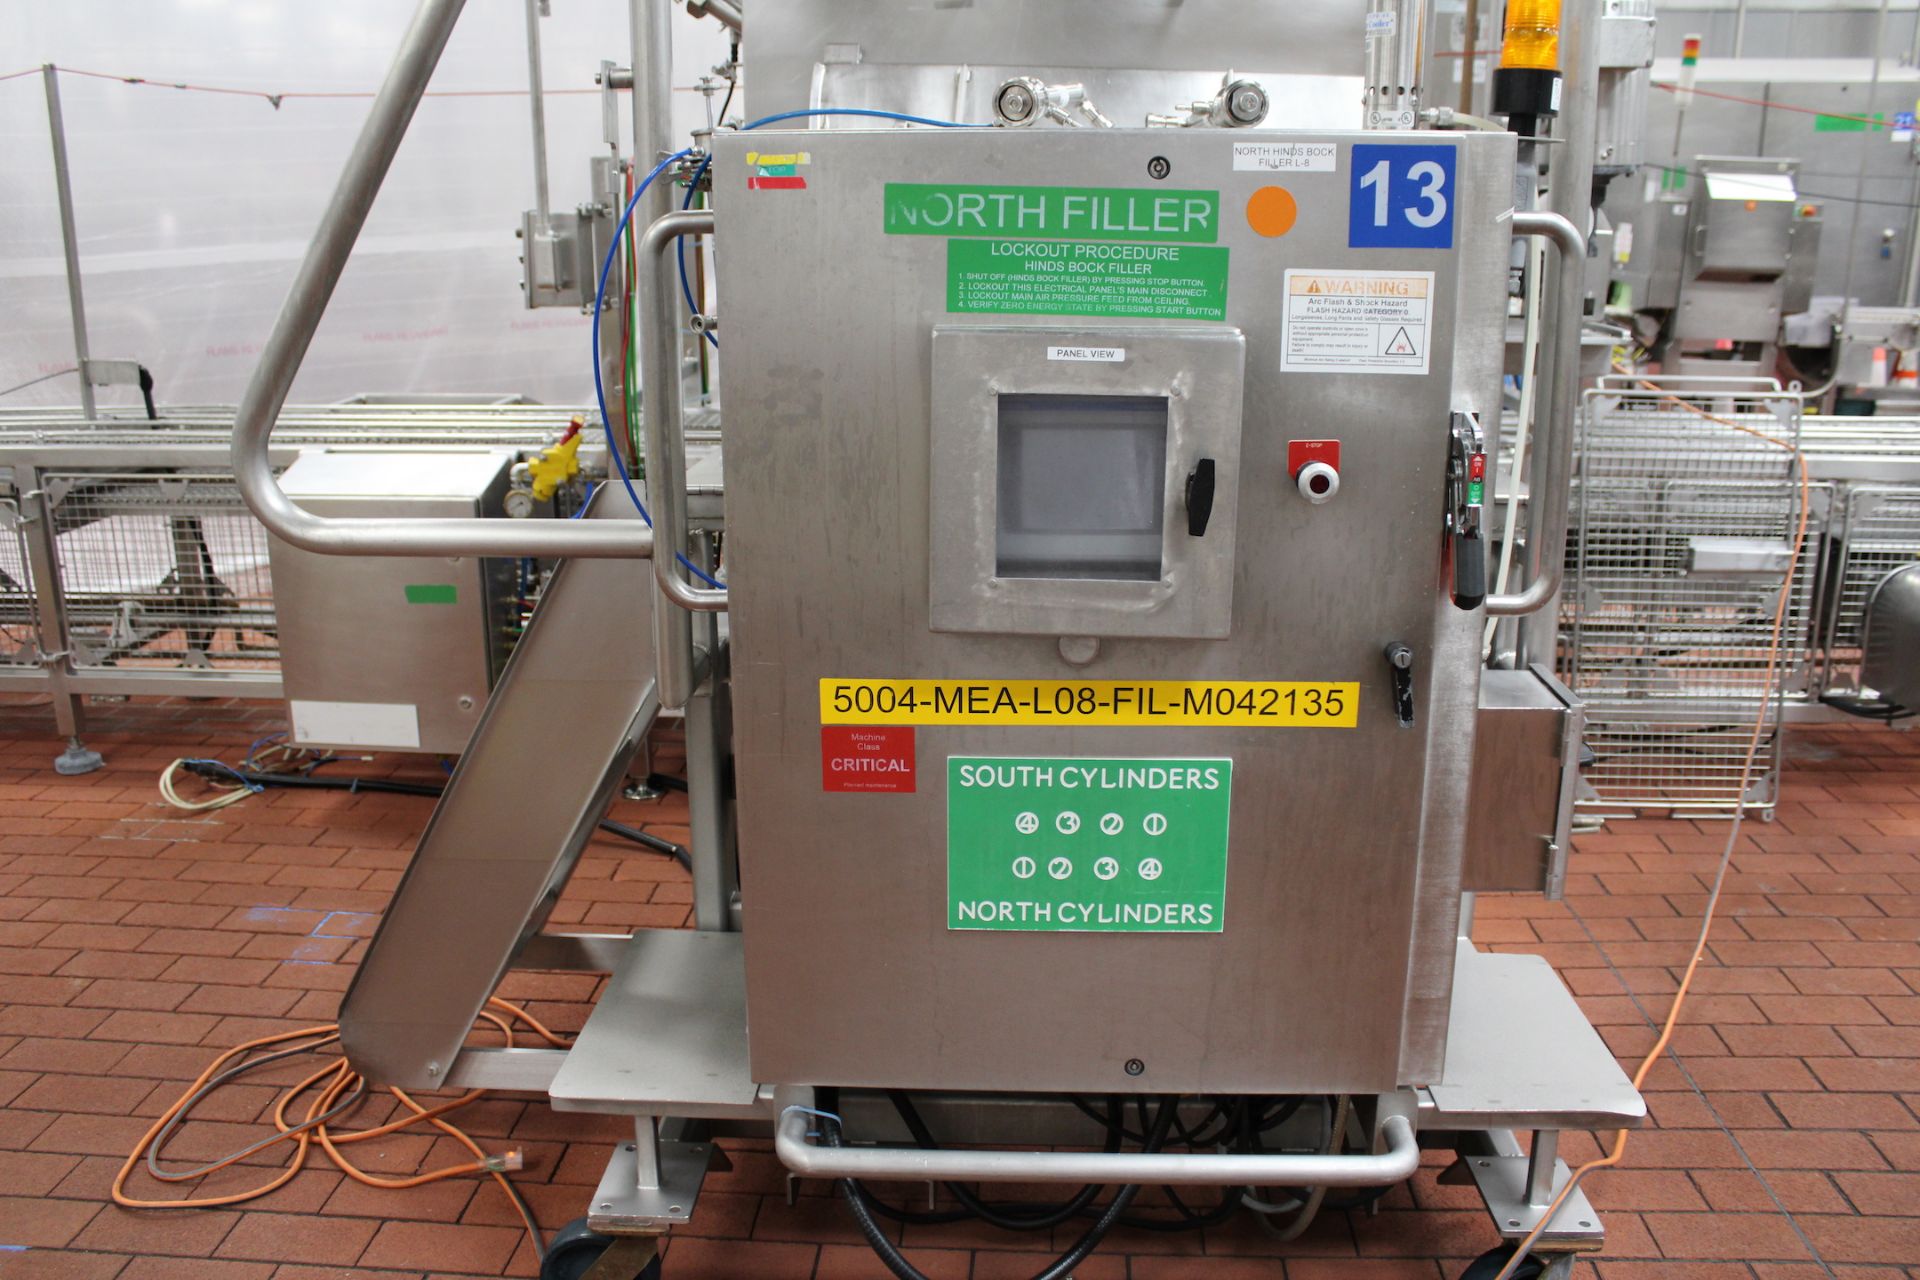 HINDSBOCK 4-WIDE SAUCE APPLICATOR / FILLER, EQUIPPED WITH SERVO DRIVEN AMPCO AND WAUKESHA CHERRY - Image 2 of 11